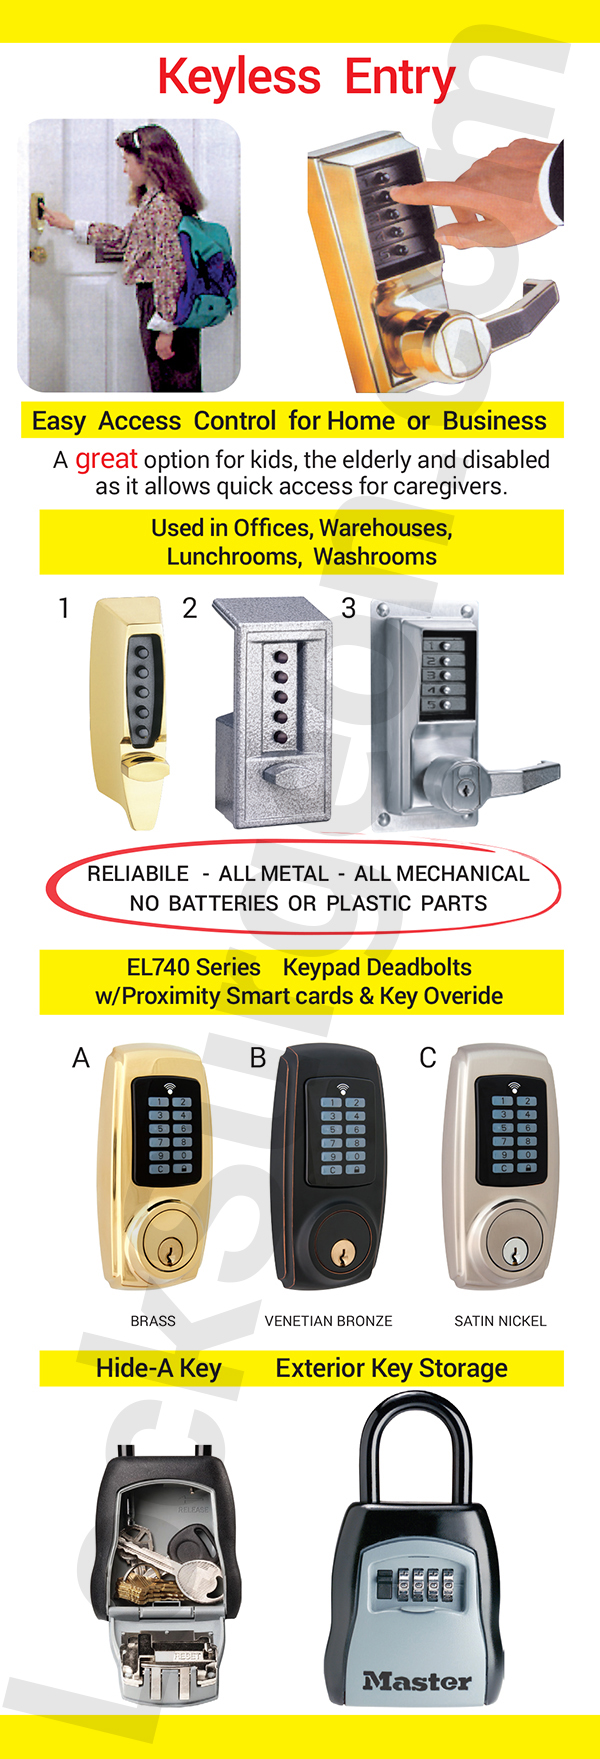 Lock Surgeon Calgary locksmith shop service centre keyless entry access commercial and residential.